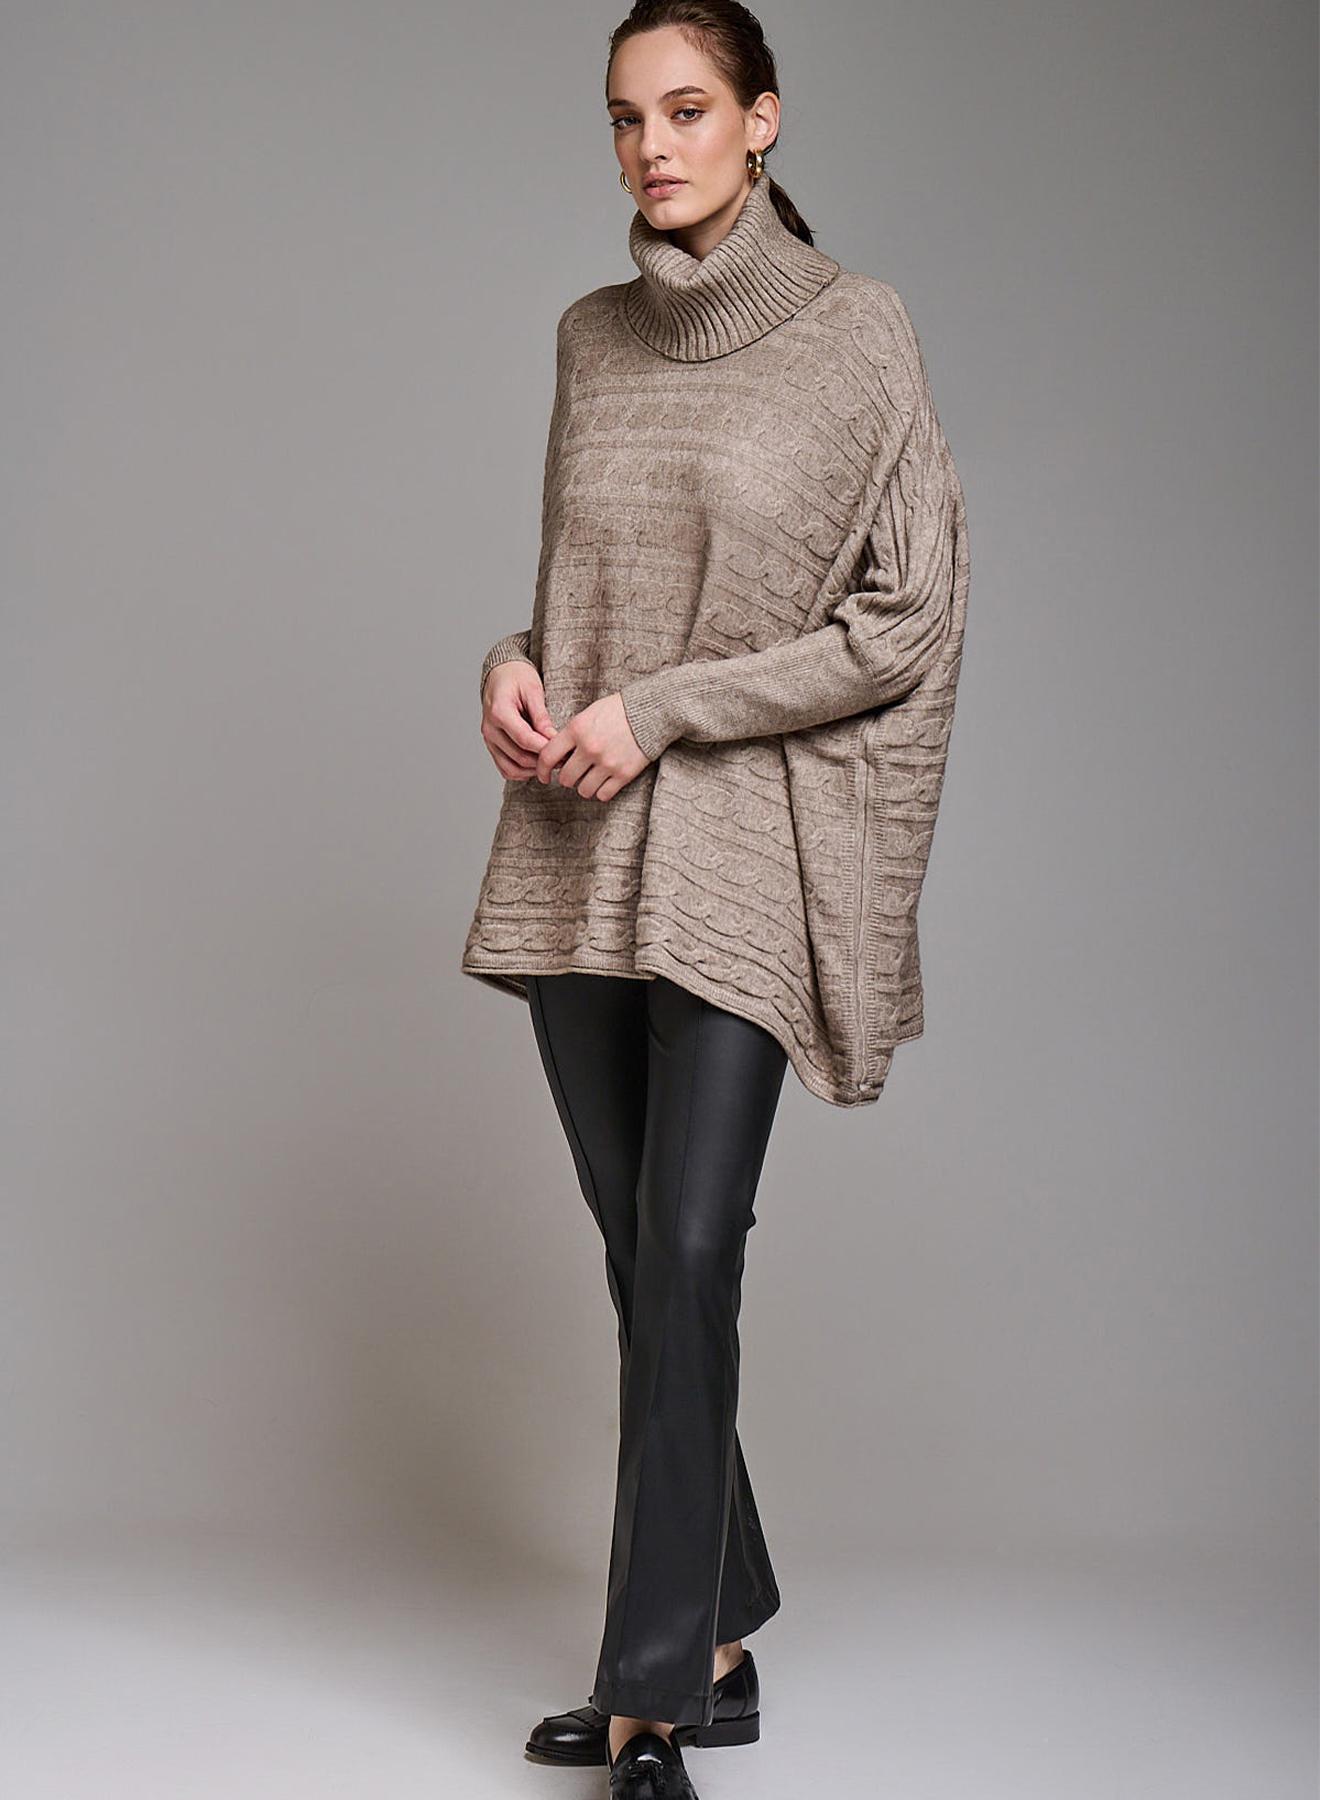 Oversized turtleneck sweater with textured details - 5